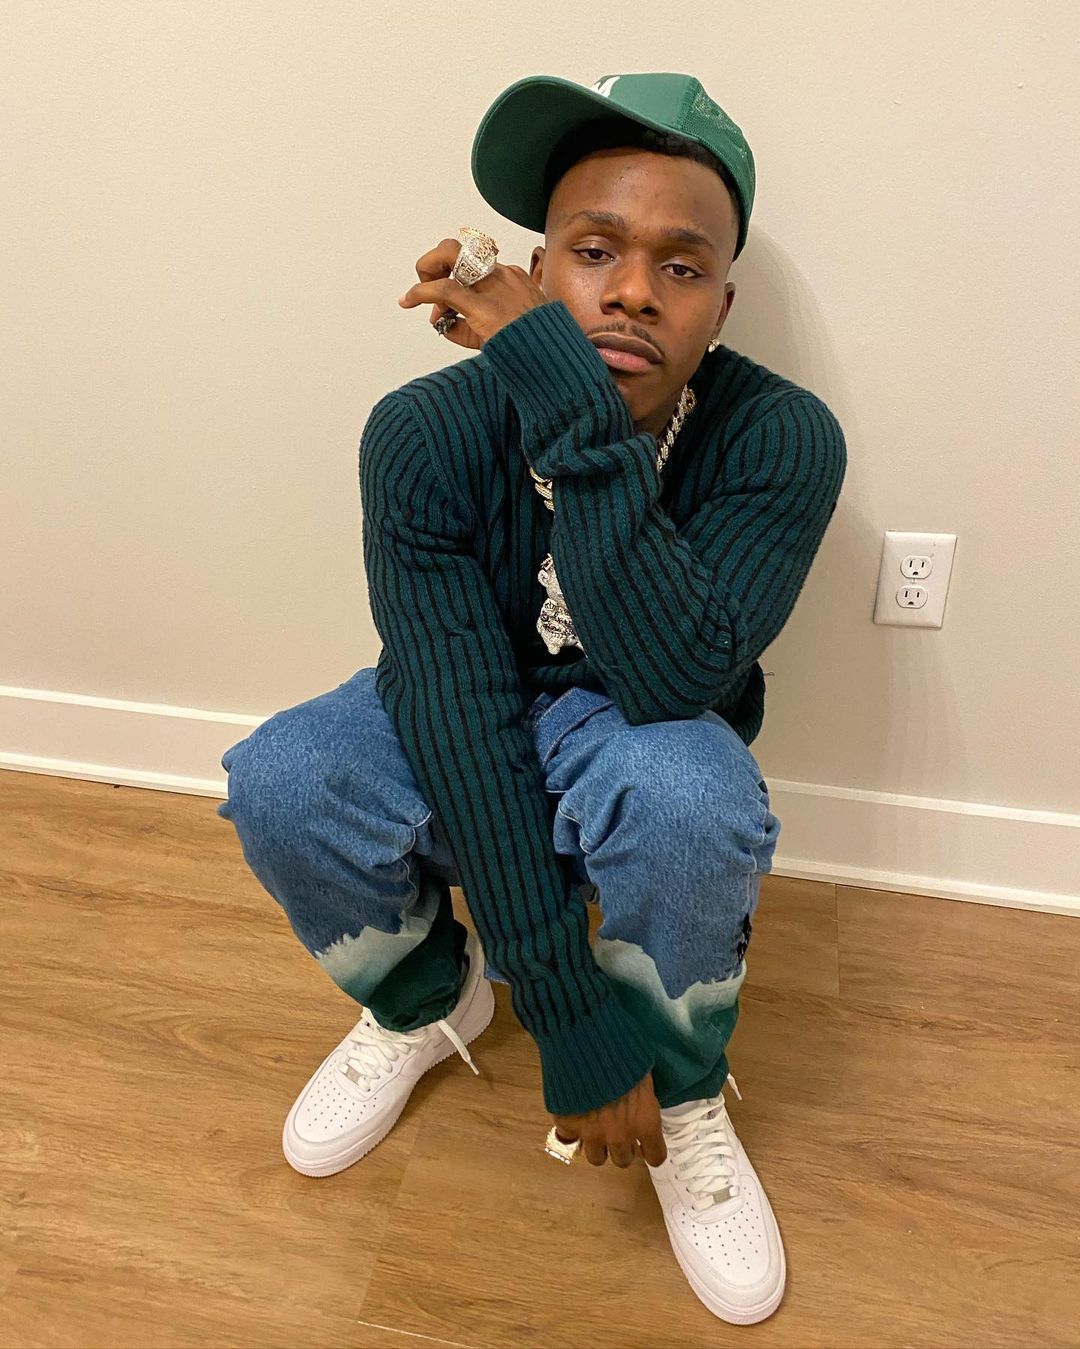 dababy-arrested-us-trump-killed-iran-leader-adama-traore-latest-news-global-world-stories-friday-december-2019-style-rave